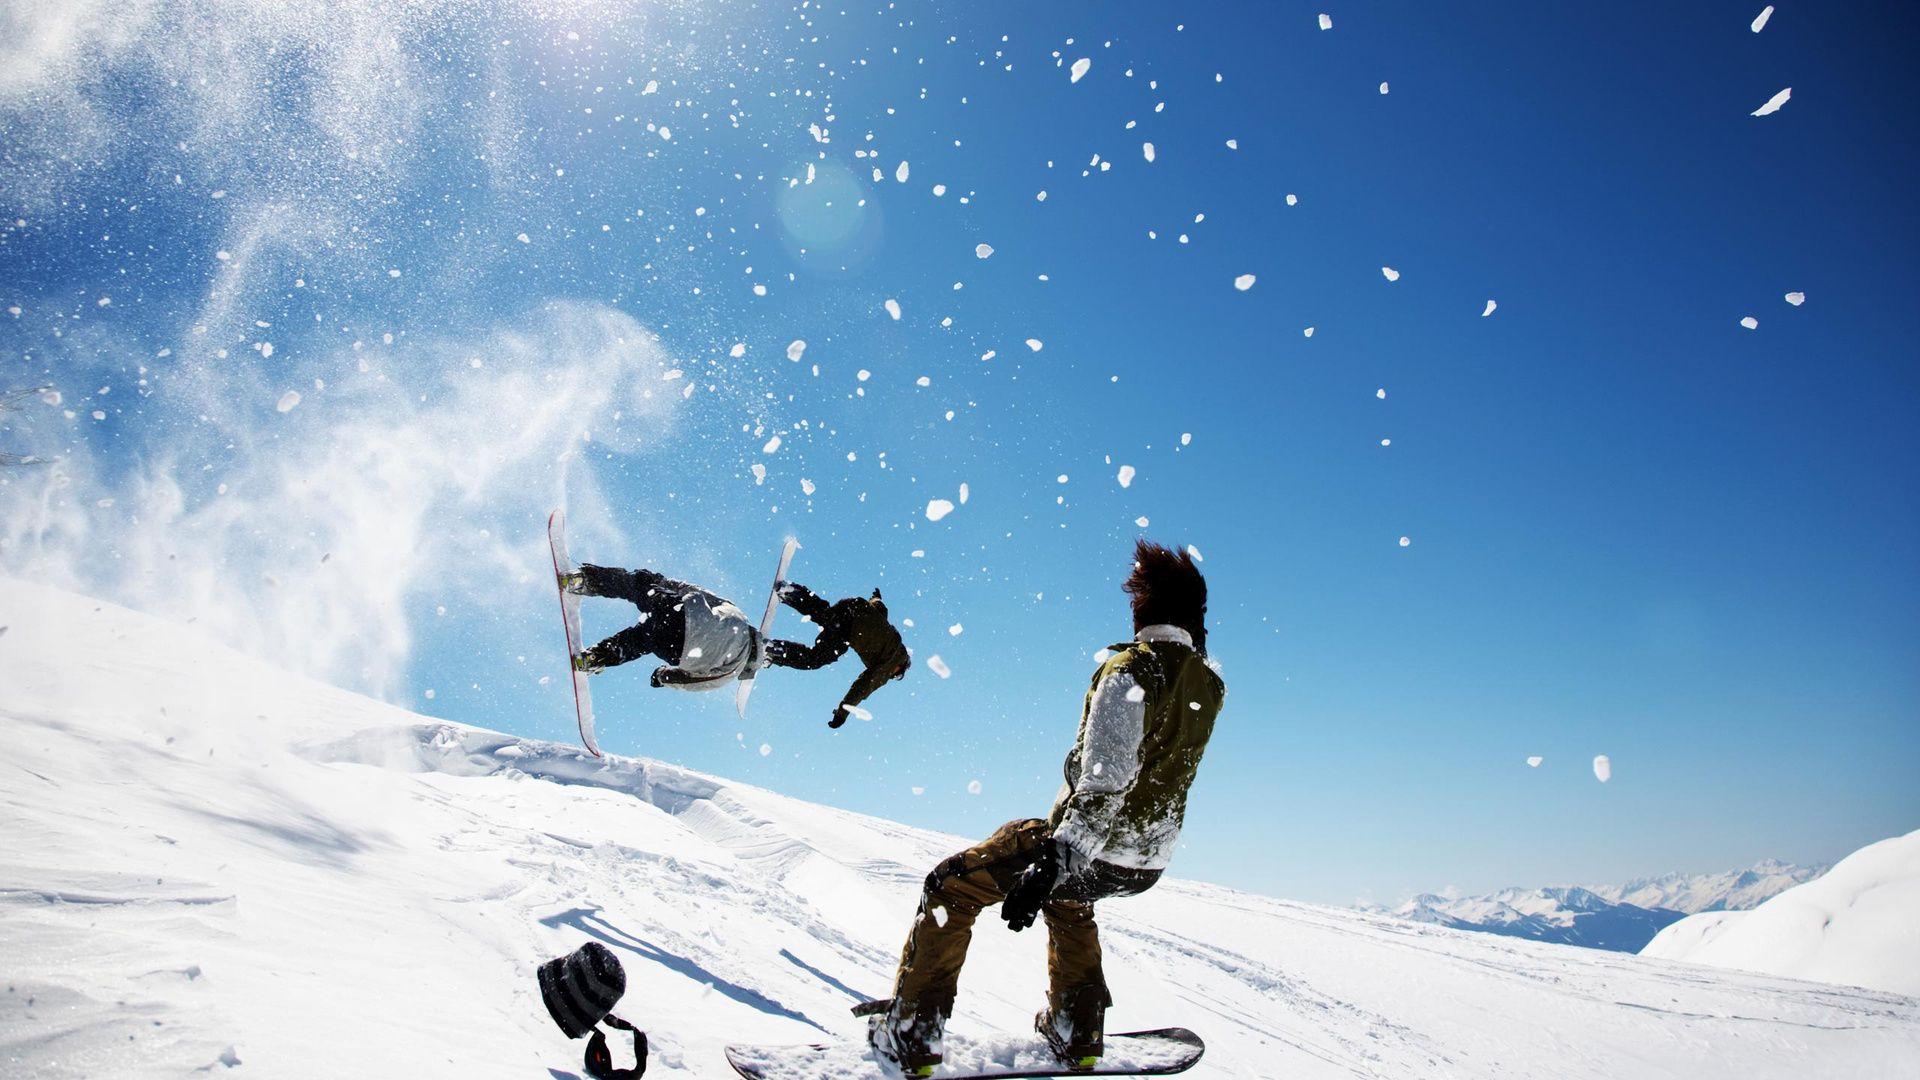 Cool Snowboarding Wallpapers - Top Free Cool Snowboarding Backgrounds